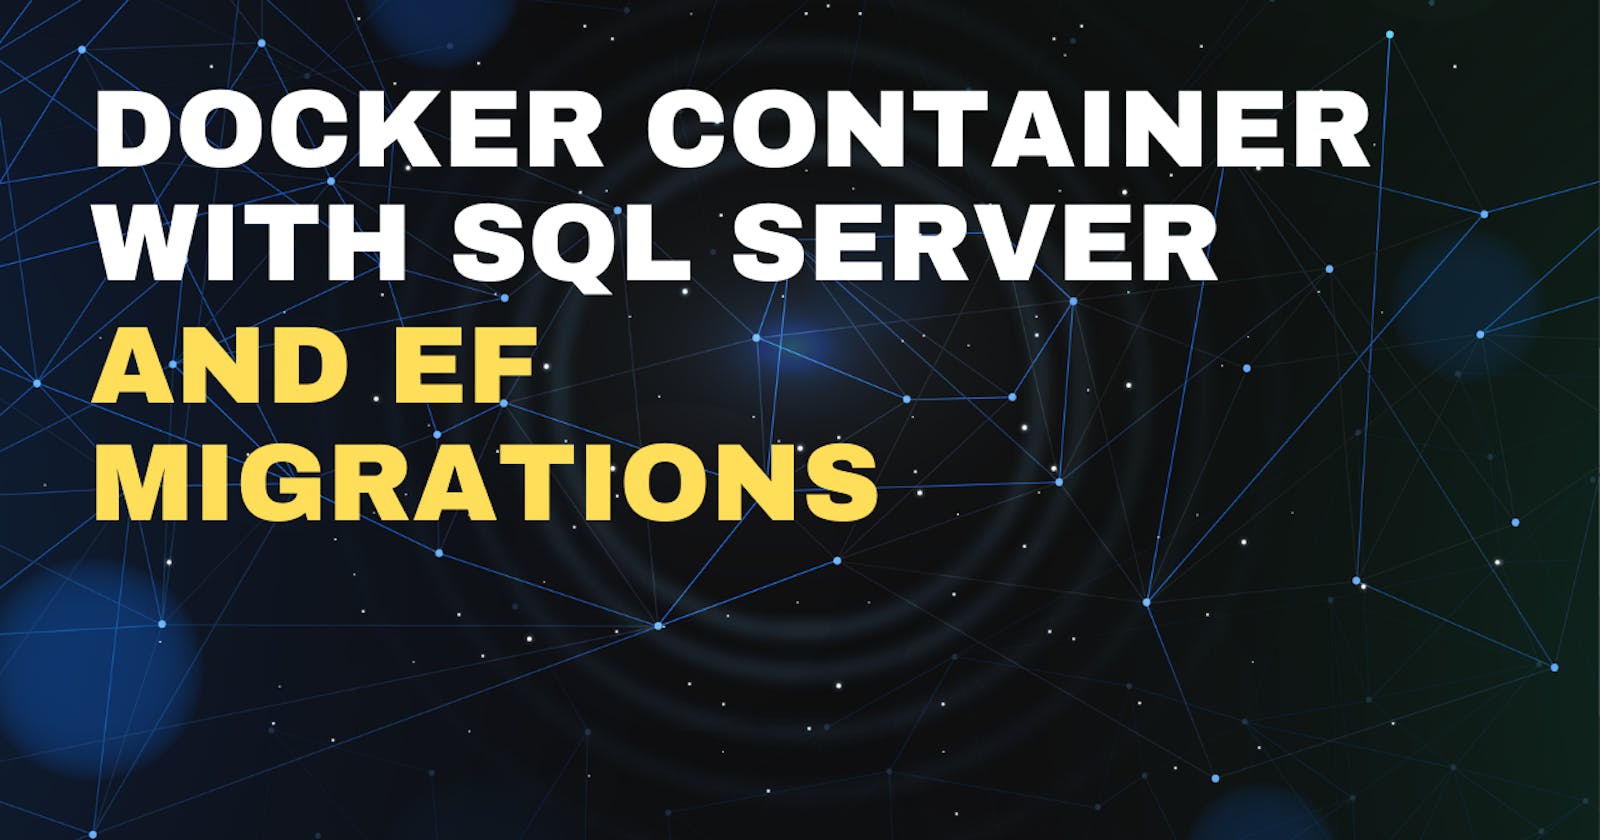 How to start a docker container with SQL Server and EF migrations